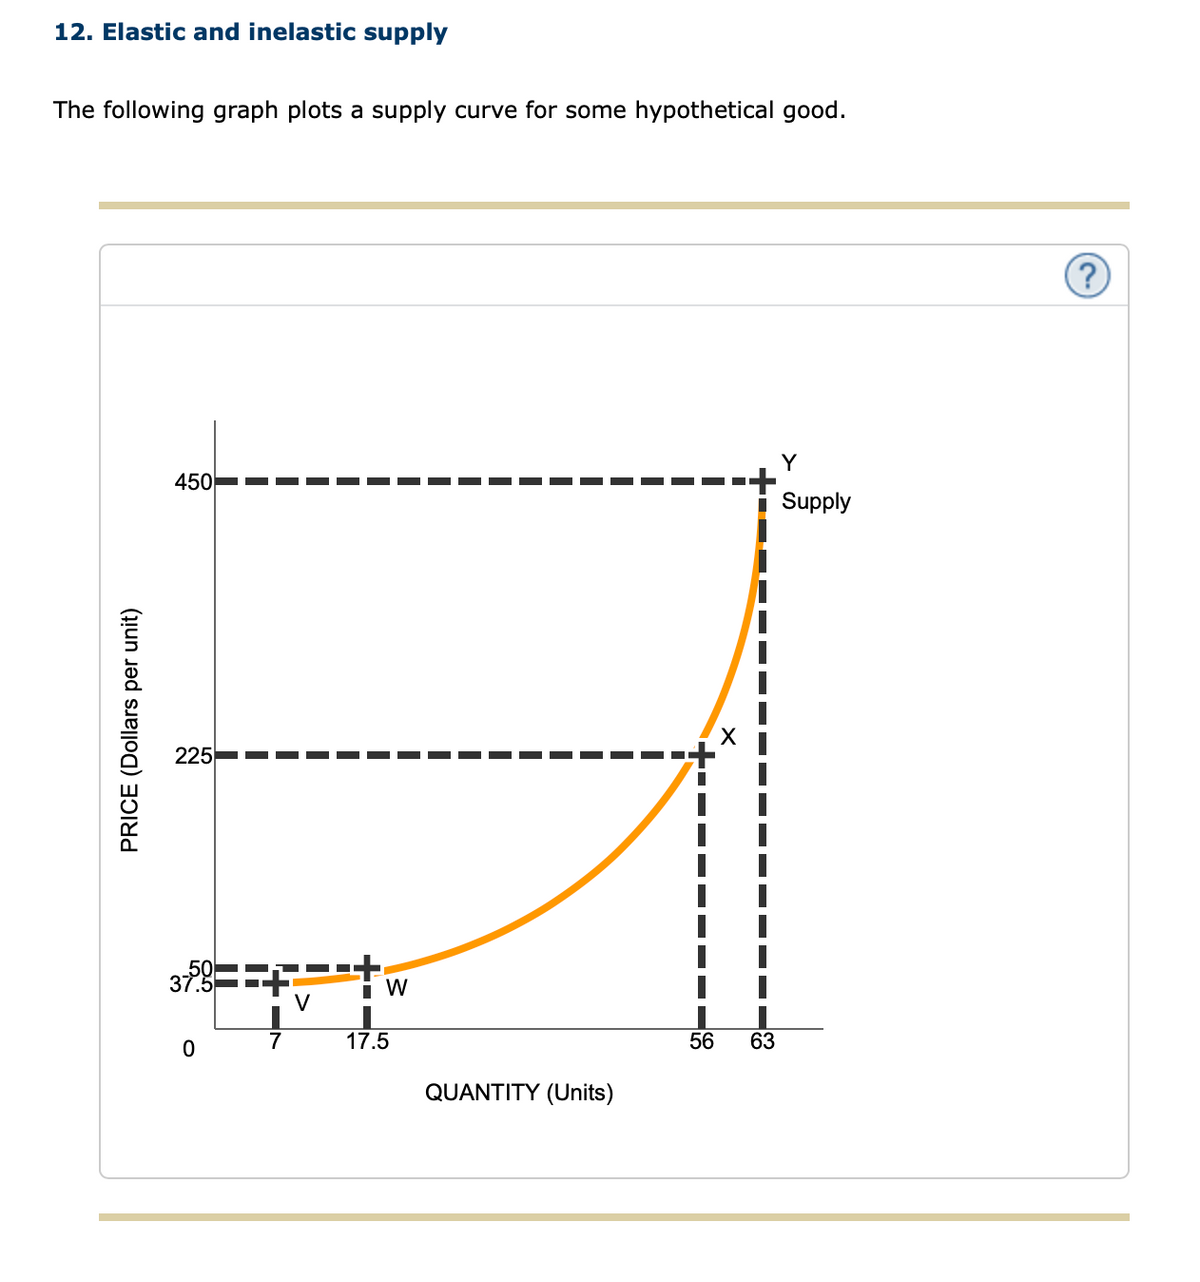 12. Elastic and inelastic supply
The following graph plots a supply curve for some hypothetical good.
PRICE (Dollars per unit)
450
225
37.9
O
W
17.5
QUANTITY (Units)
56 63
Y
Supply
?